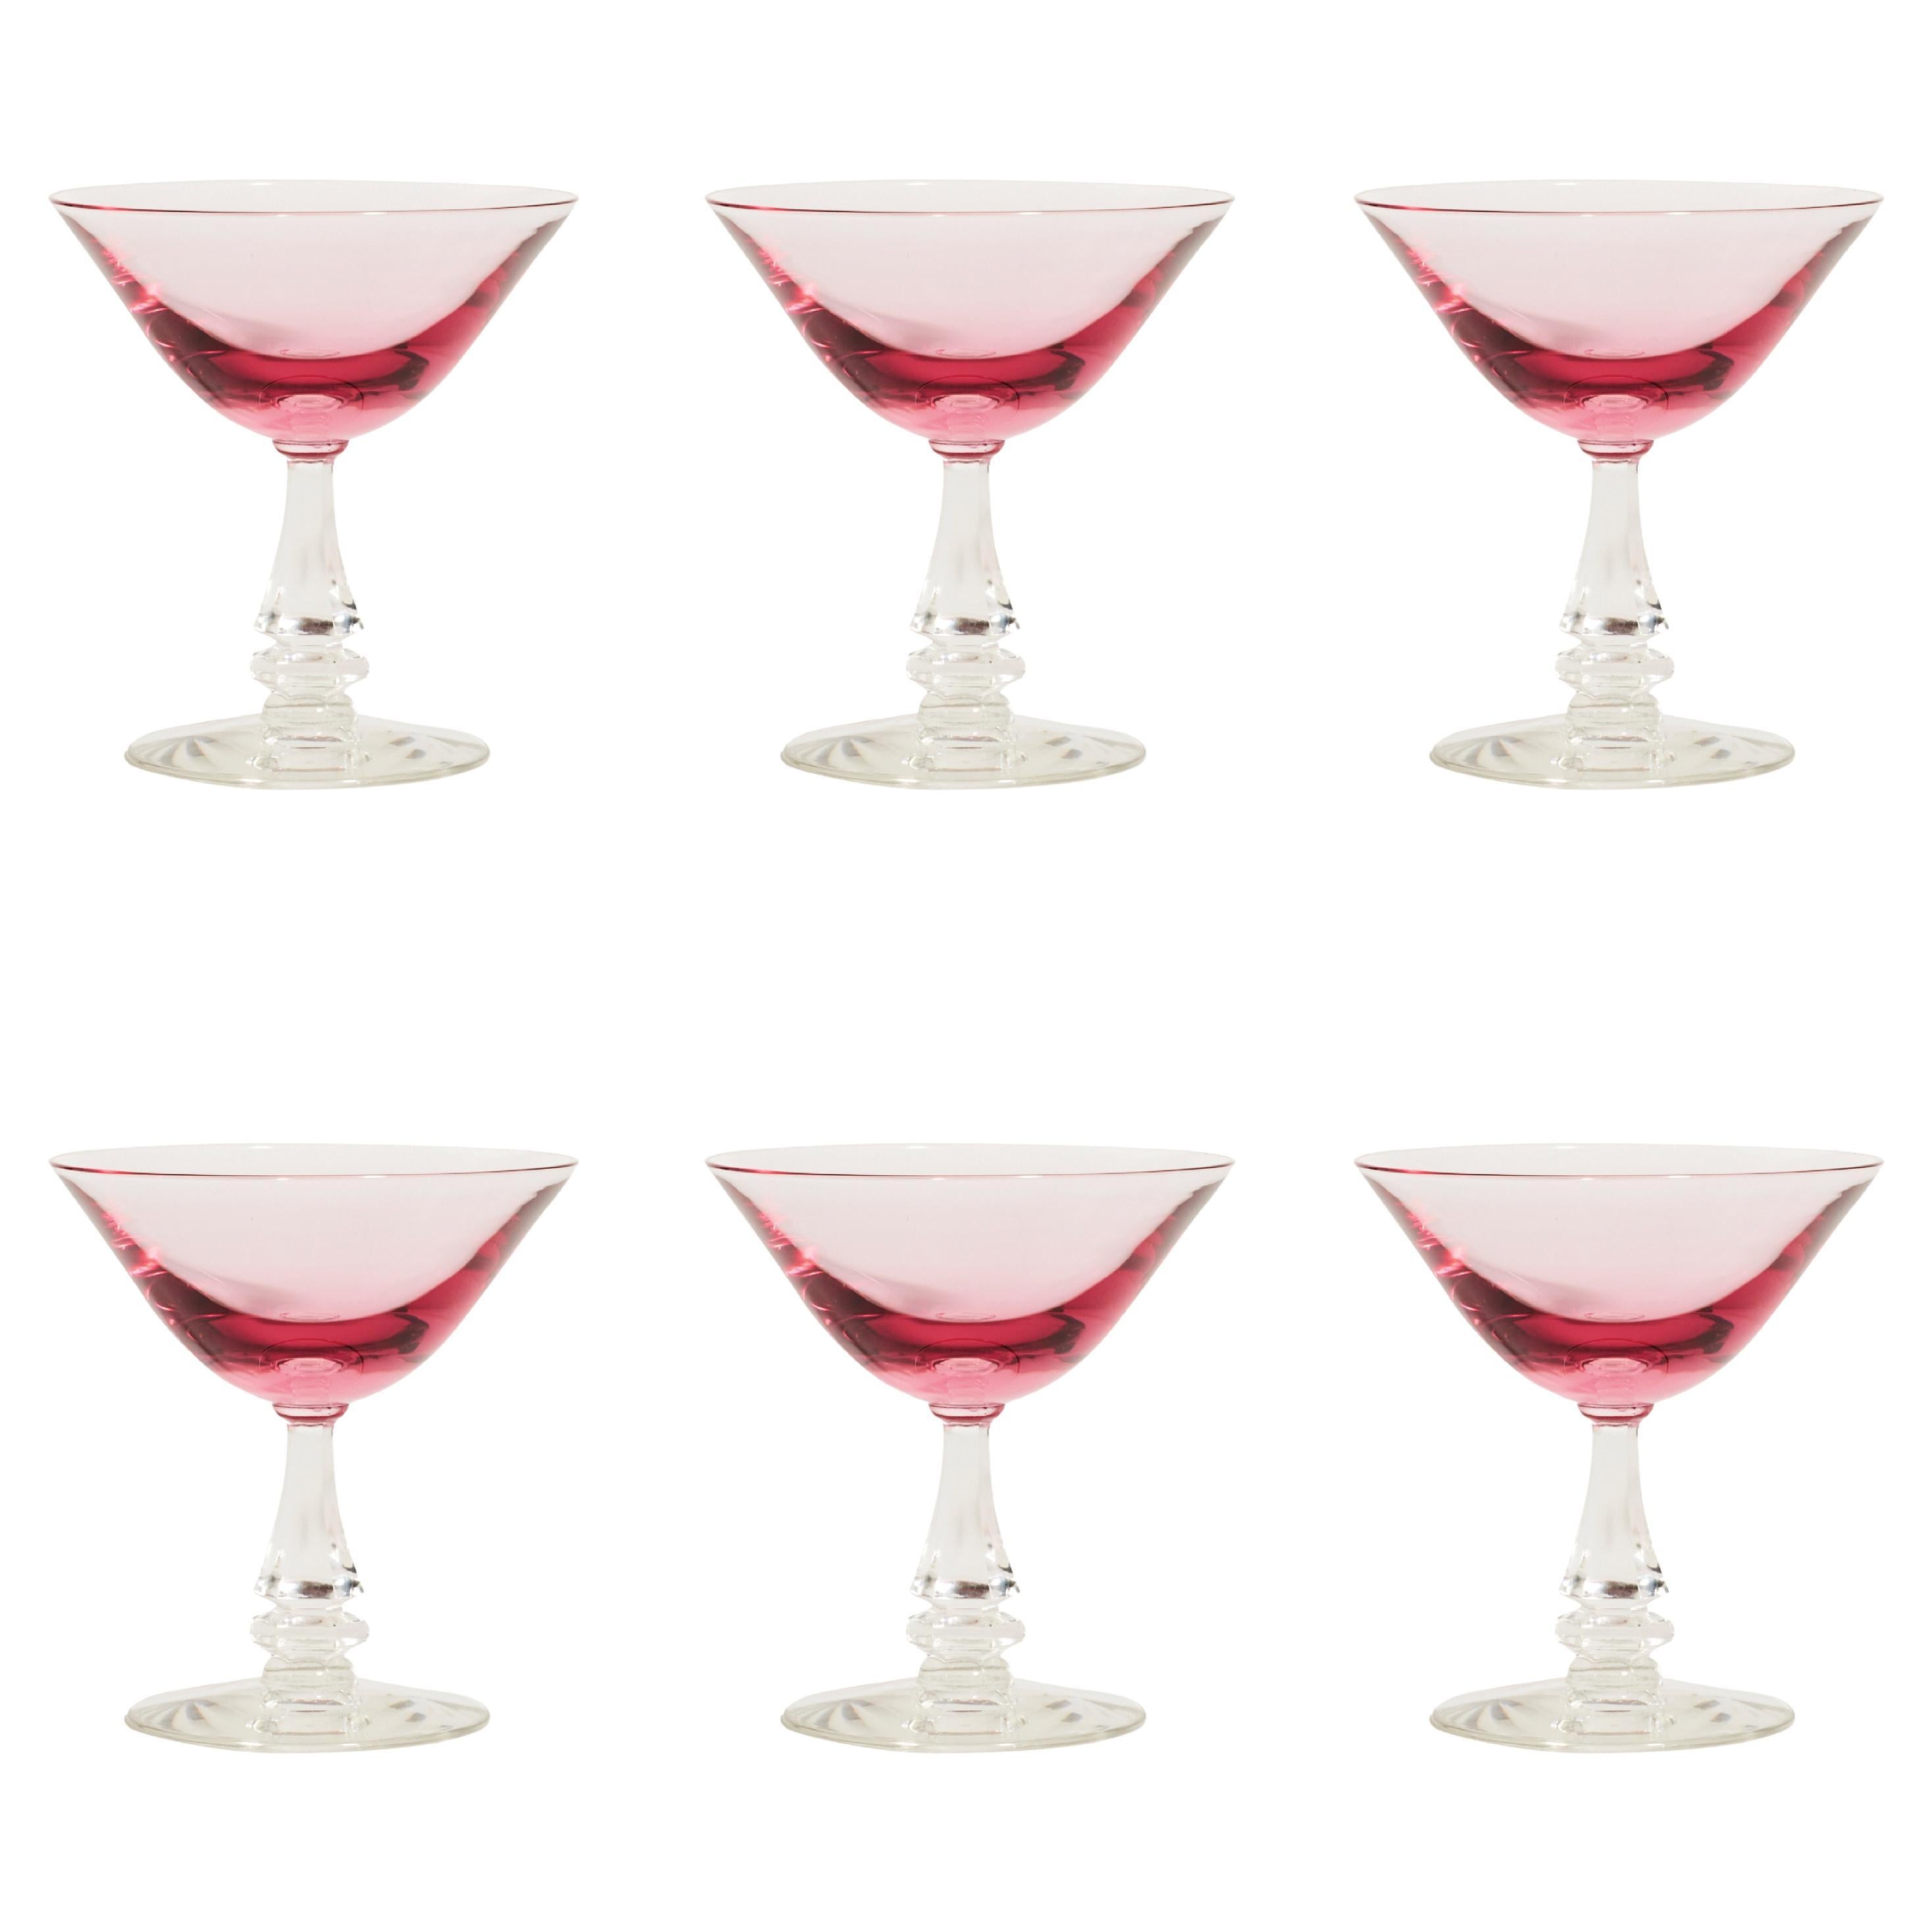 Ombré cerise pink crystal cocktail glasses with decorative faceted stems, set of six. Glasses are hand made and can vary ever so slightly in color shape.